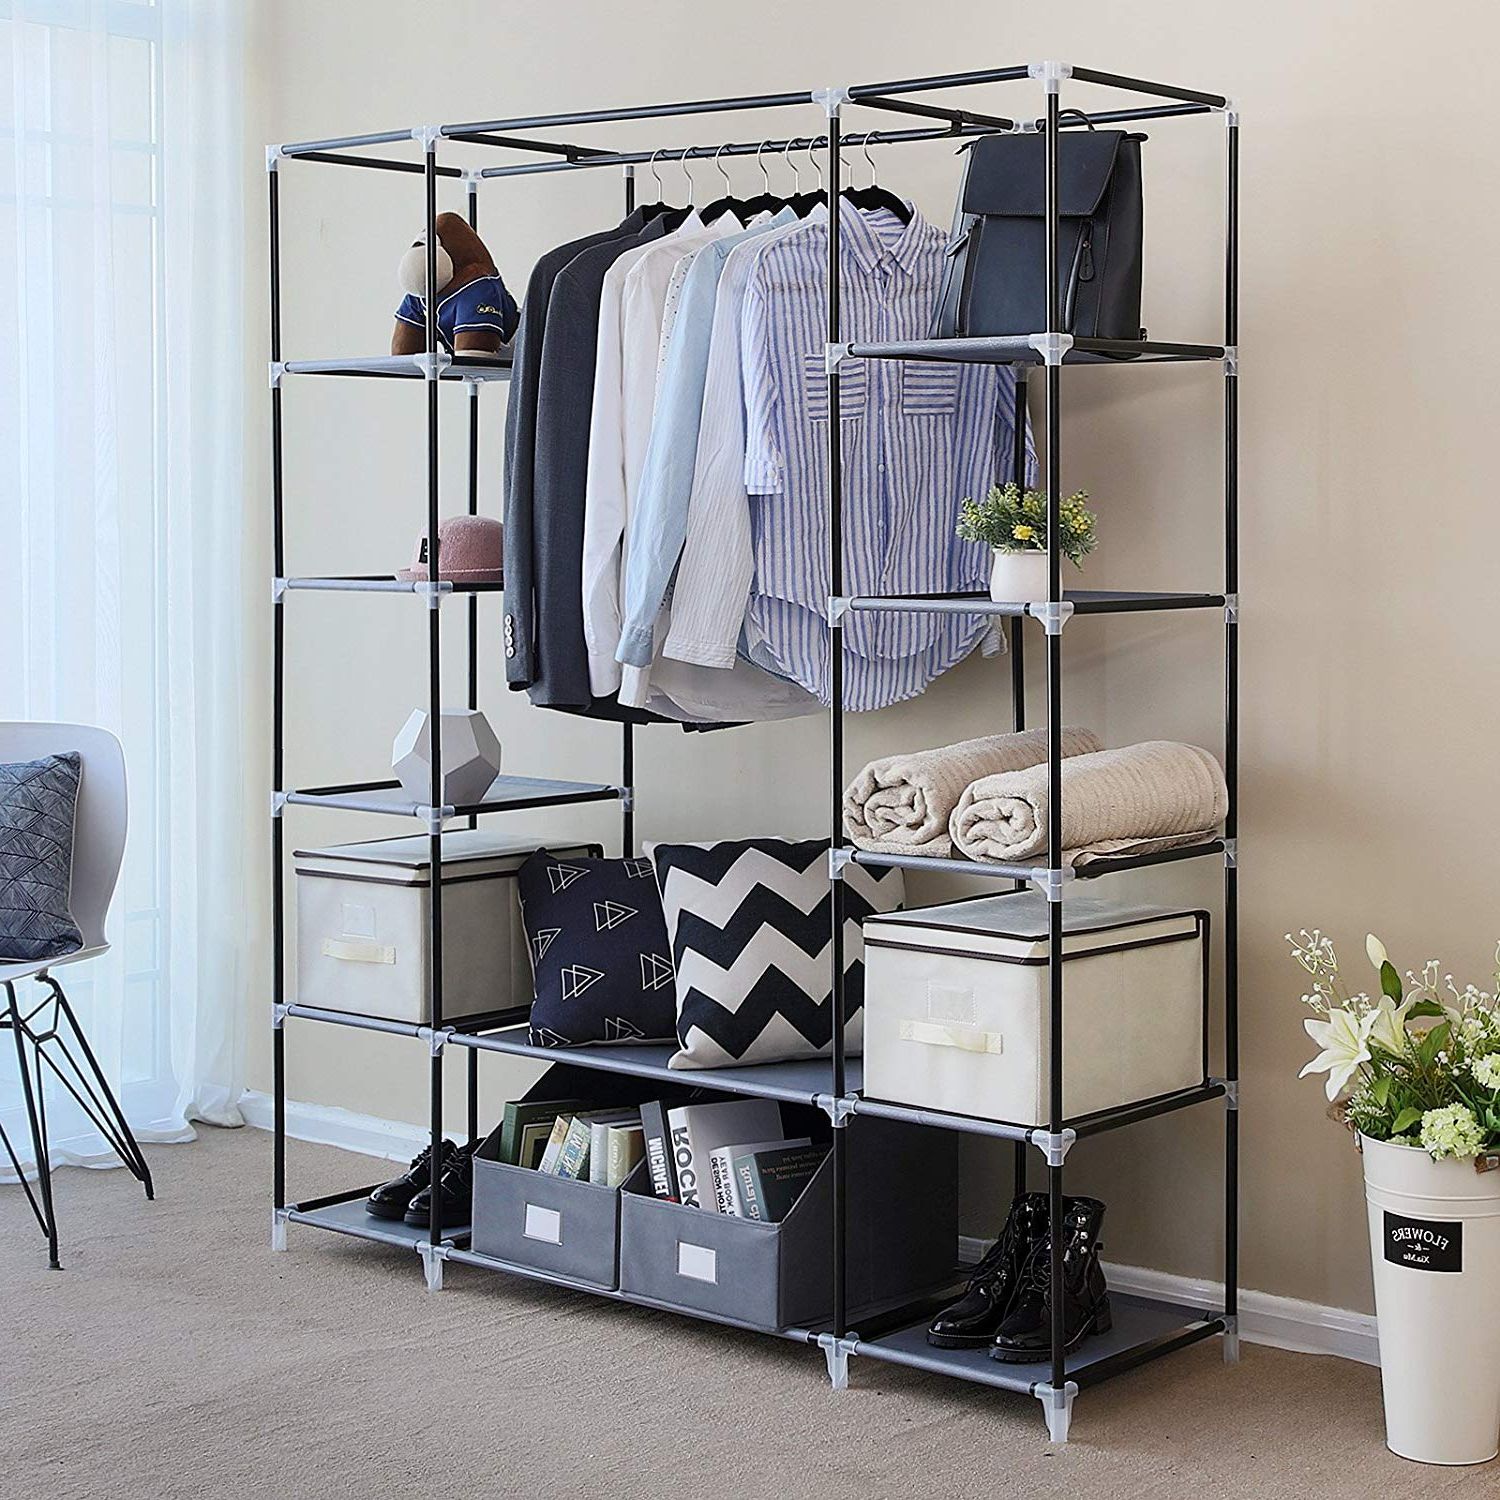 Wardrobes With Shelf Portable Closet Within 2018 20 Portable Closet Choices For Easy Set Up And Cleaning (View 10 of 10)